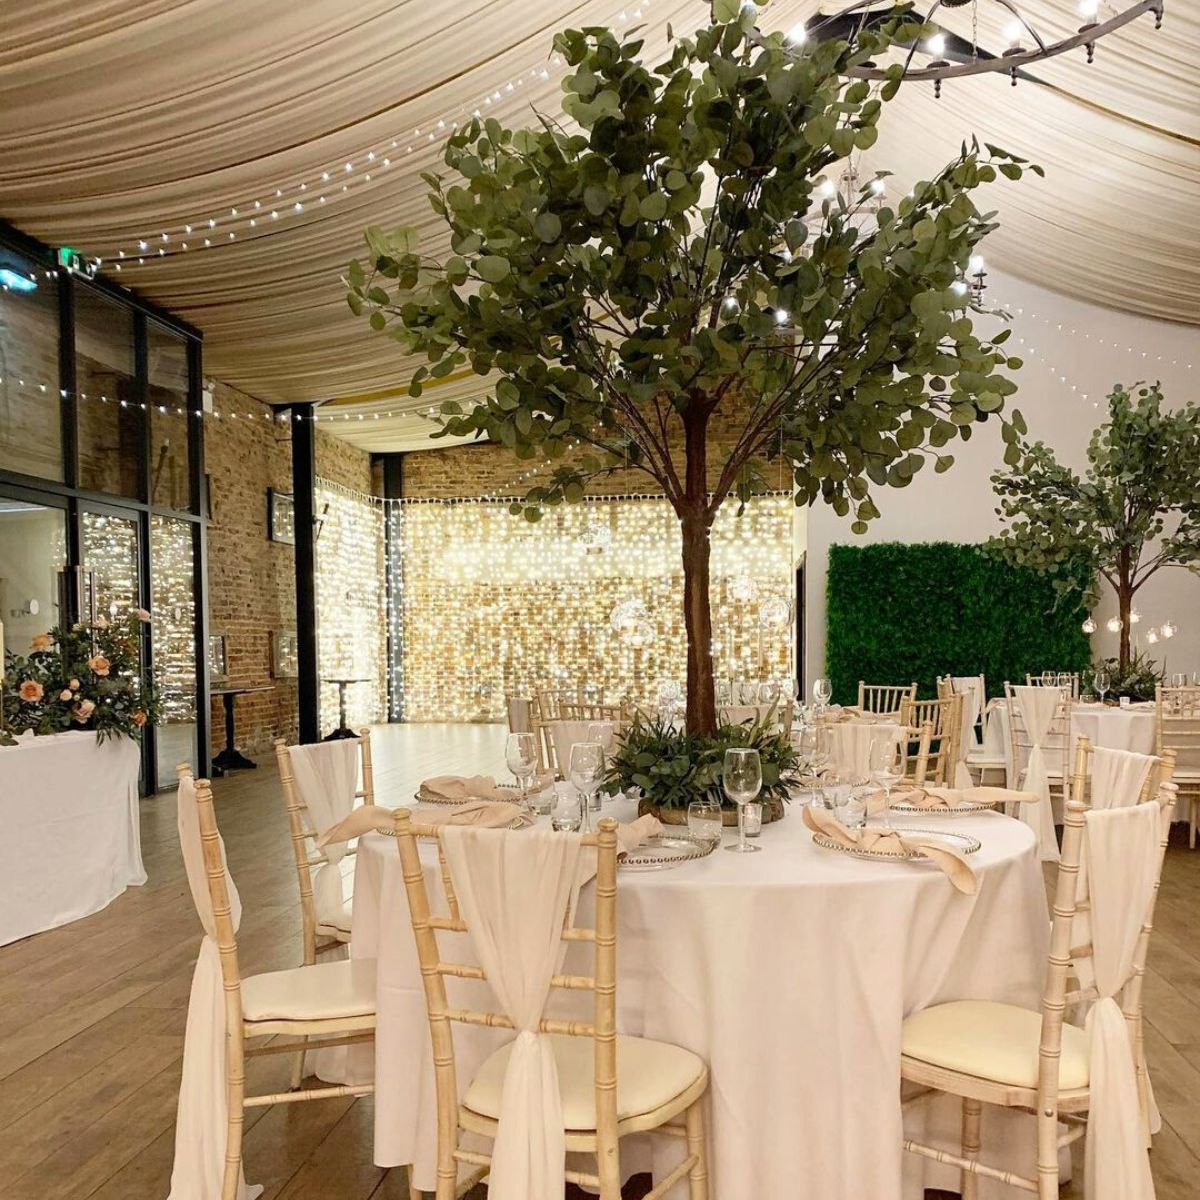 Living trees and plants at weddings are a great trend